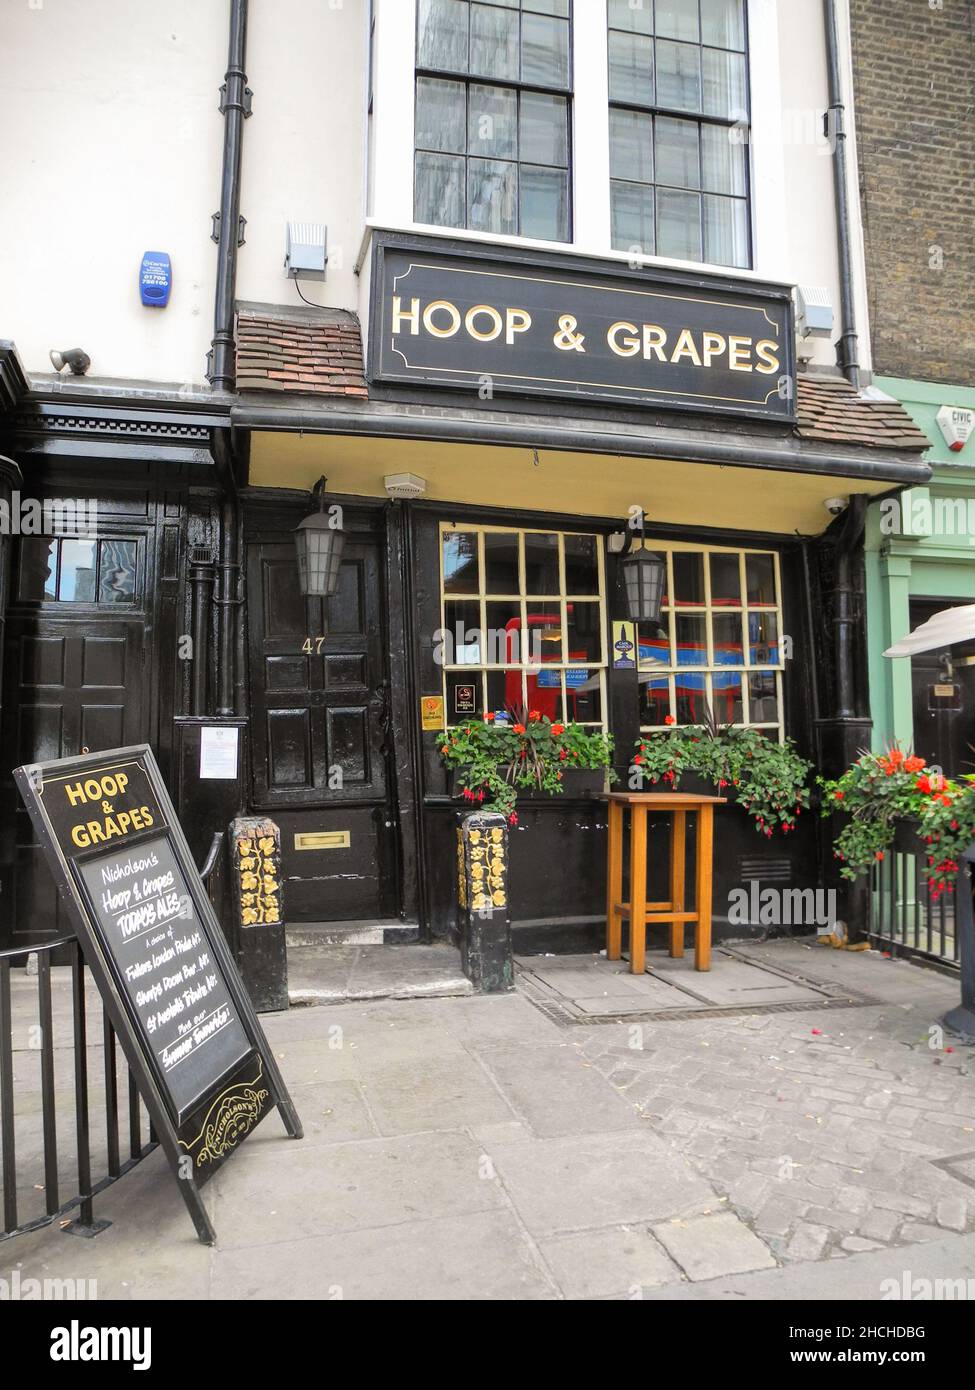 The Hoop and Grapes is a 17th century Grade II listed public house on Aldgate High Street in London's East End. Stock Photo